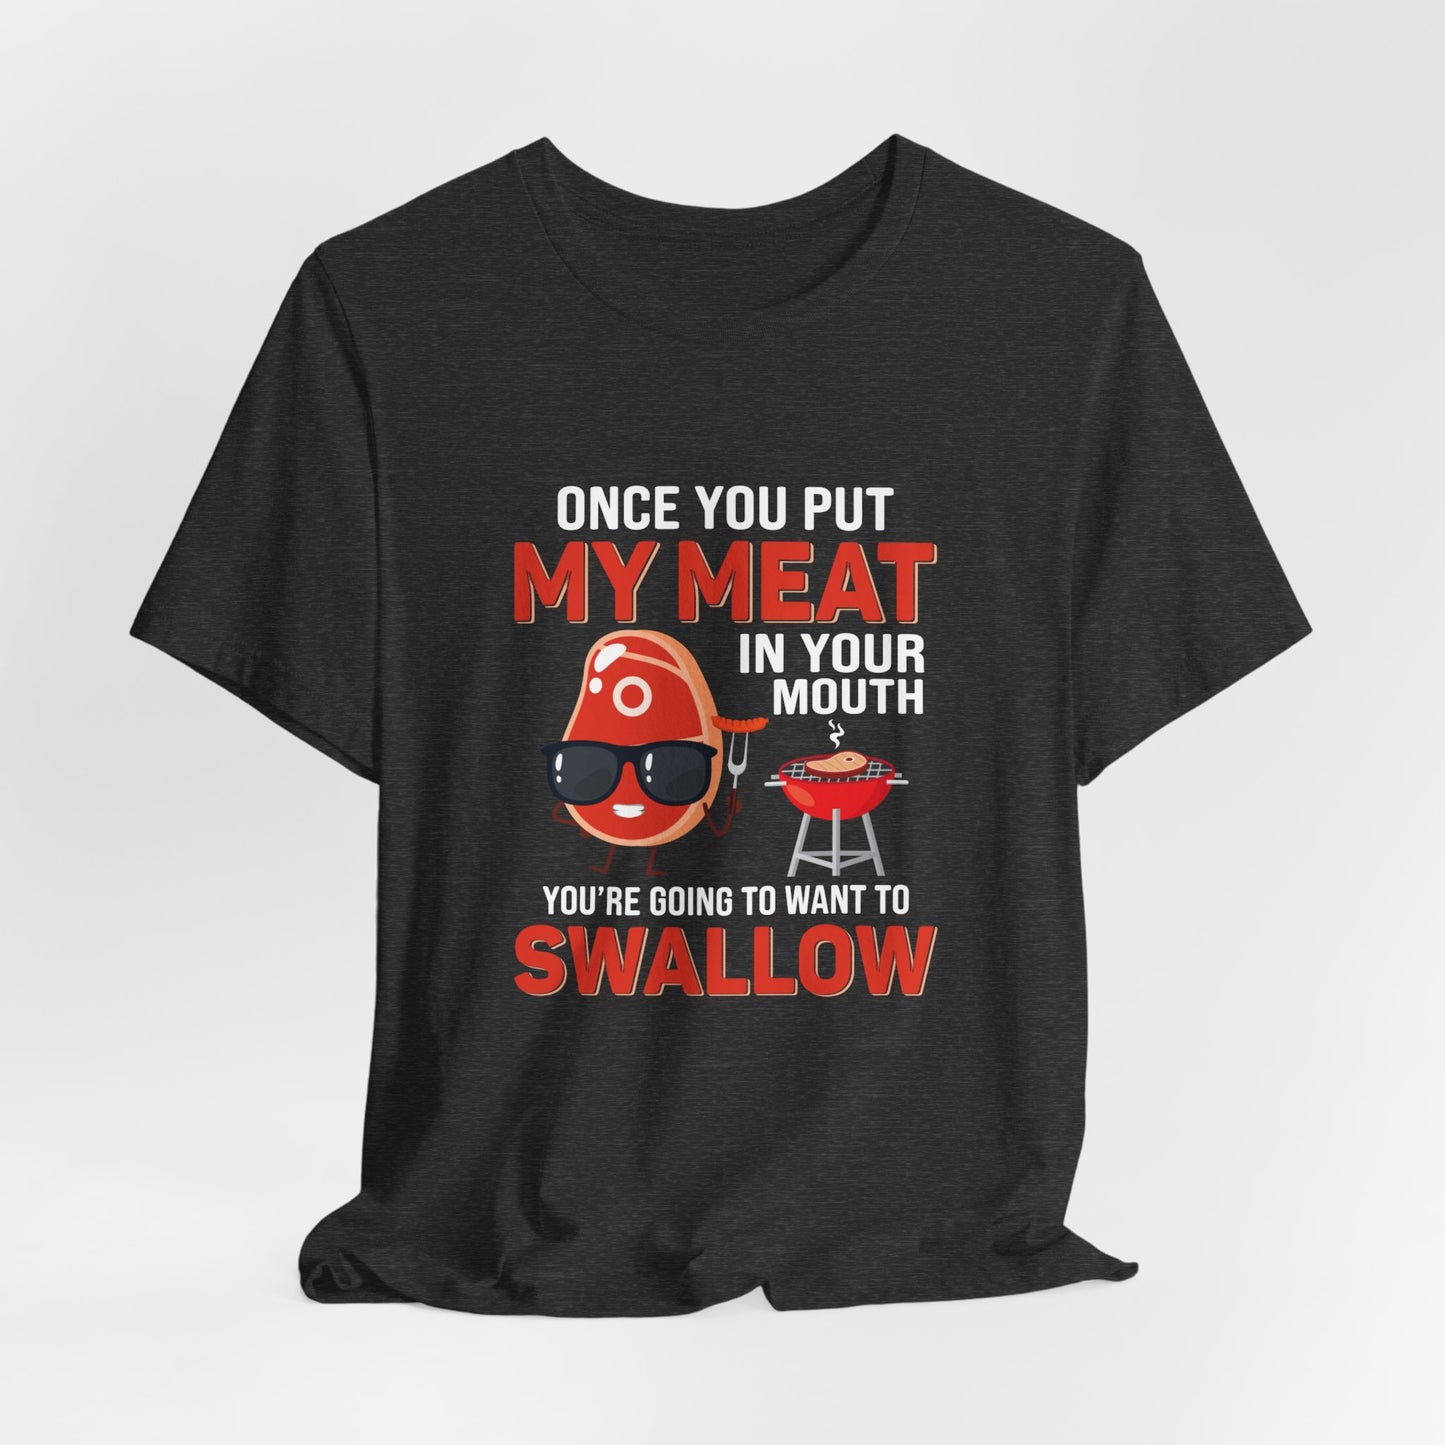 Meat in your mouth T-Shirt